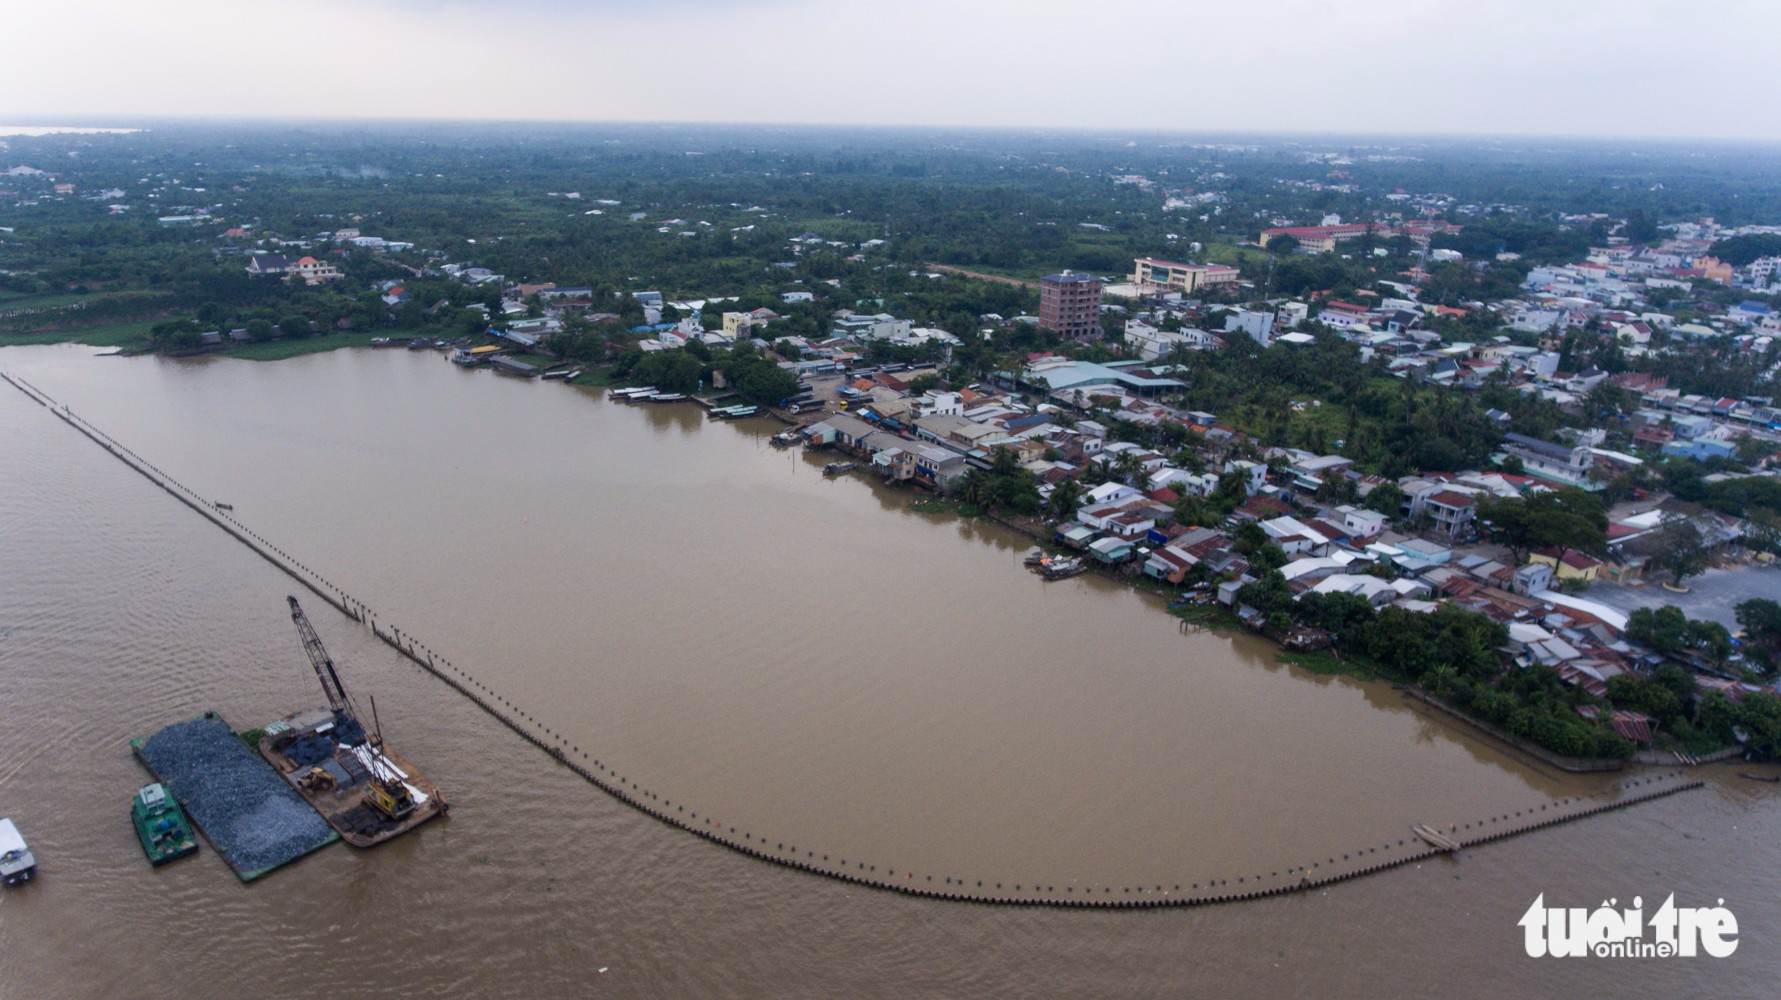 ​Fruit park project encroaches on river, poses subsidence hazards in southern Vietnam